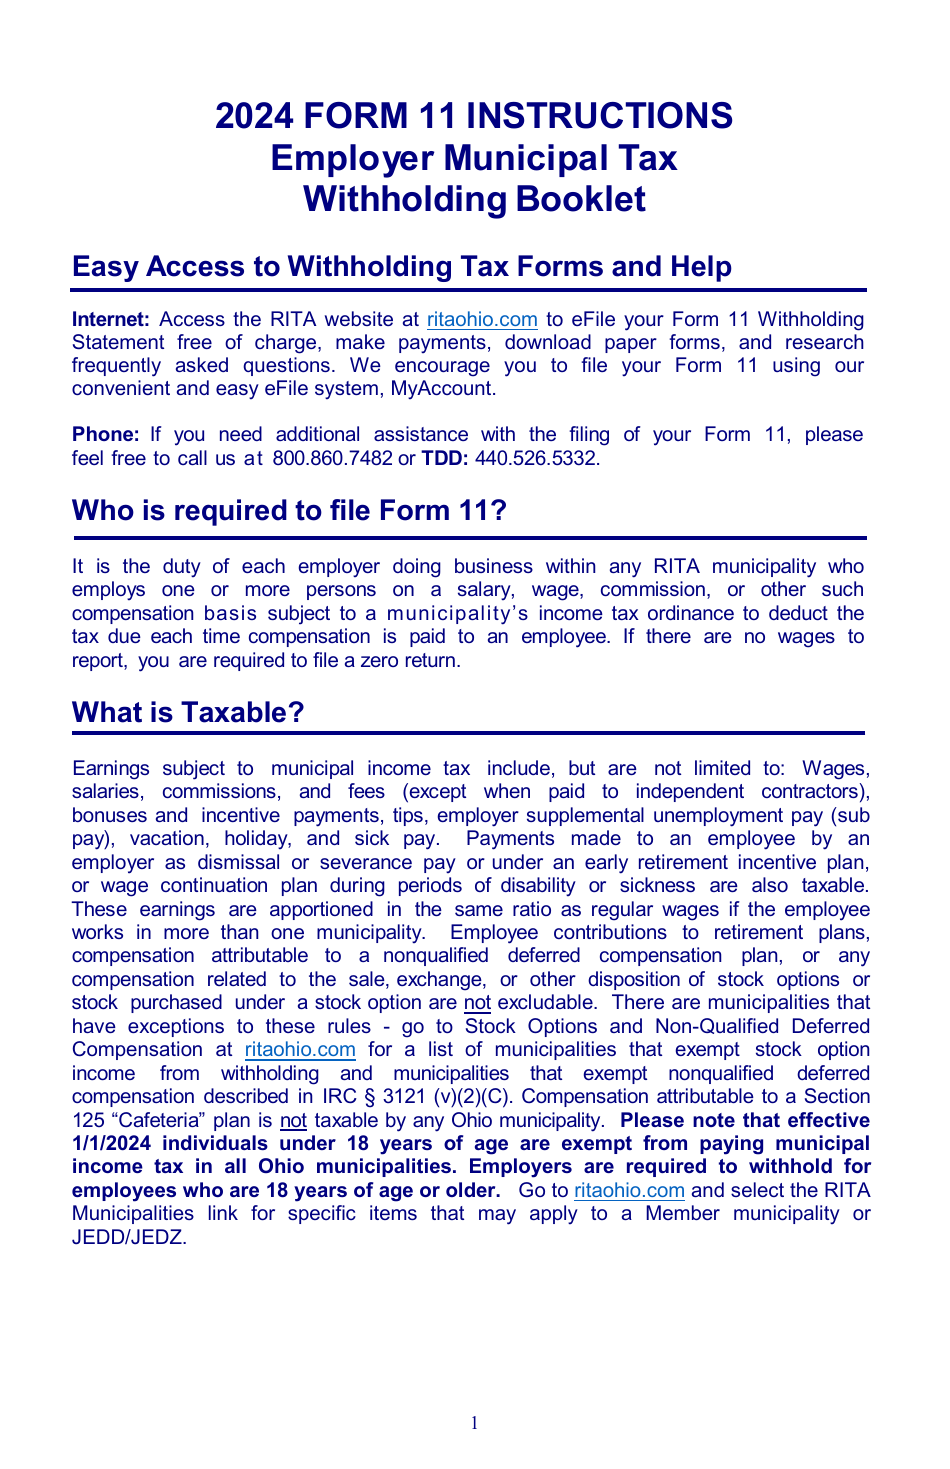 Instructions for Form 11 Employers Municipal Tax Withholding Statement - Ohio, Page 1